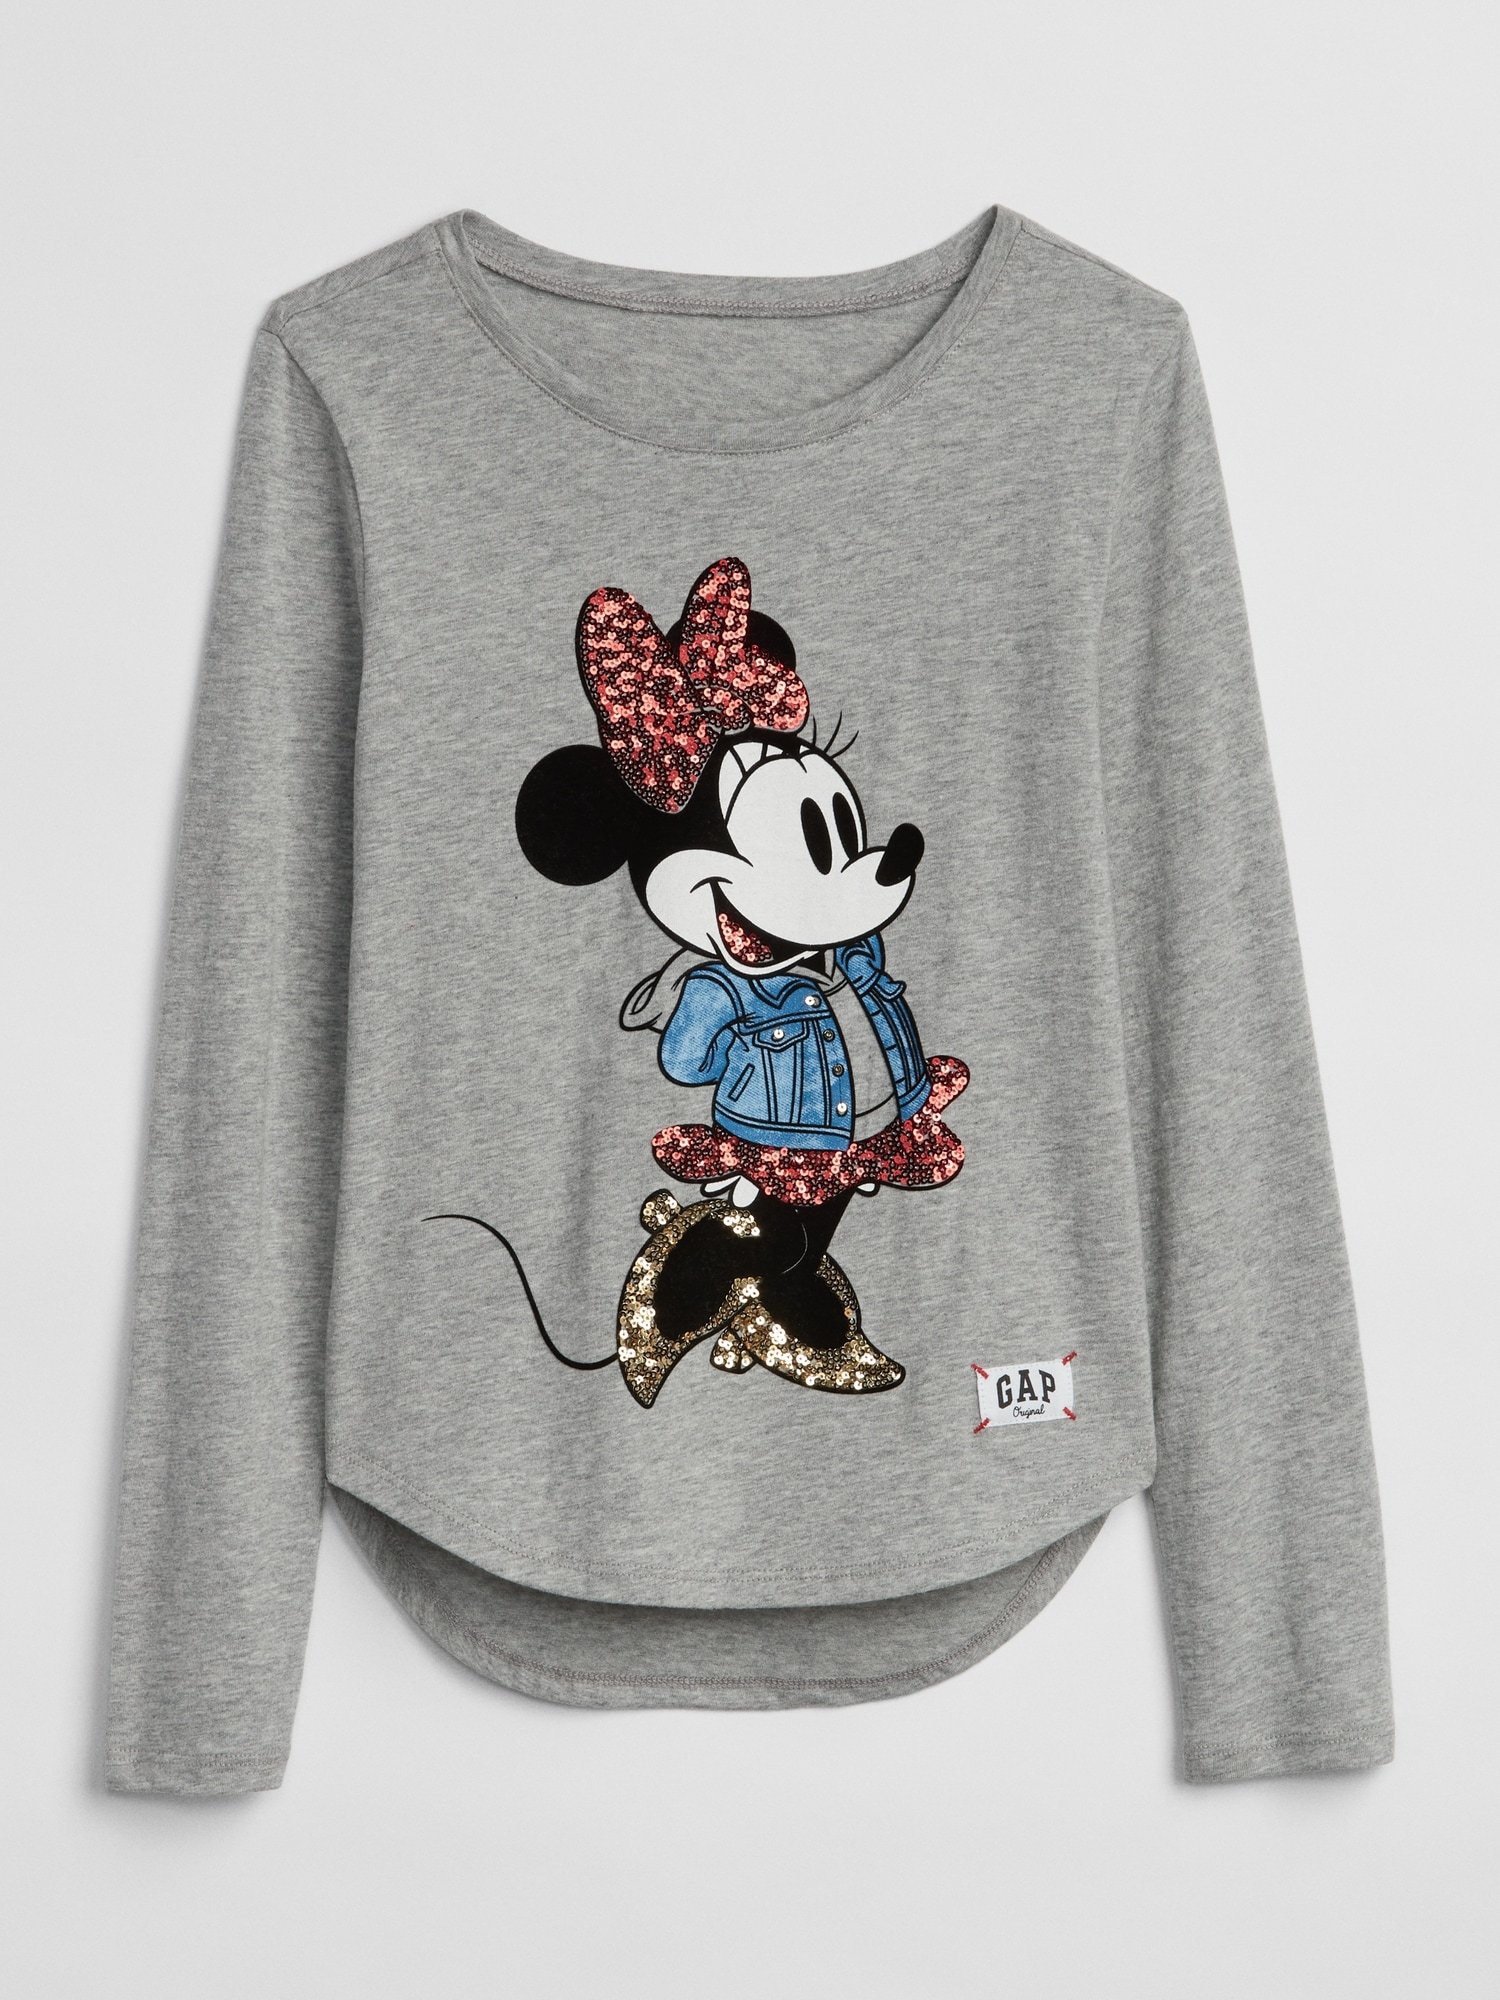 GapKids | Disney Mickey Mouse and Minnie Mouse T-Shirt product image